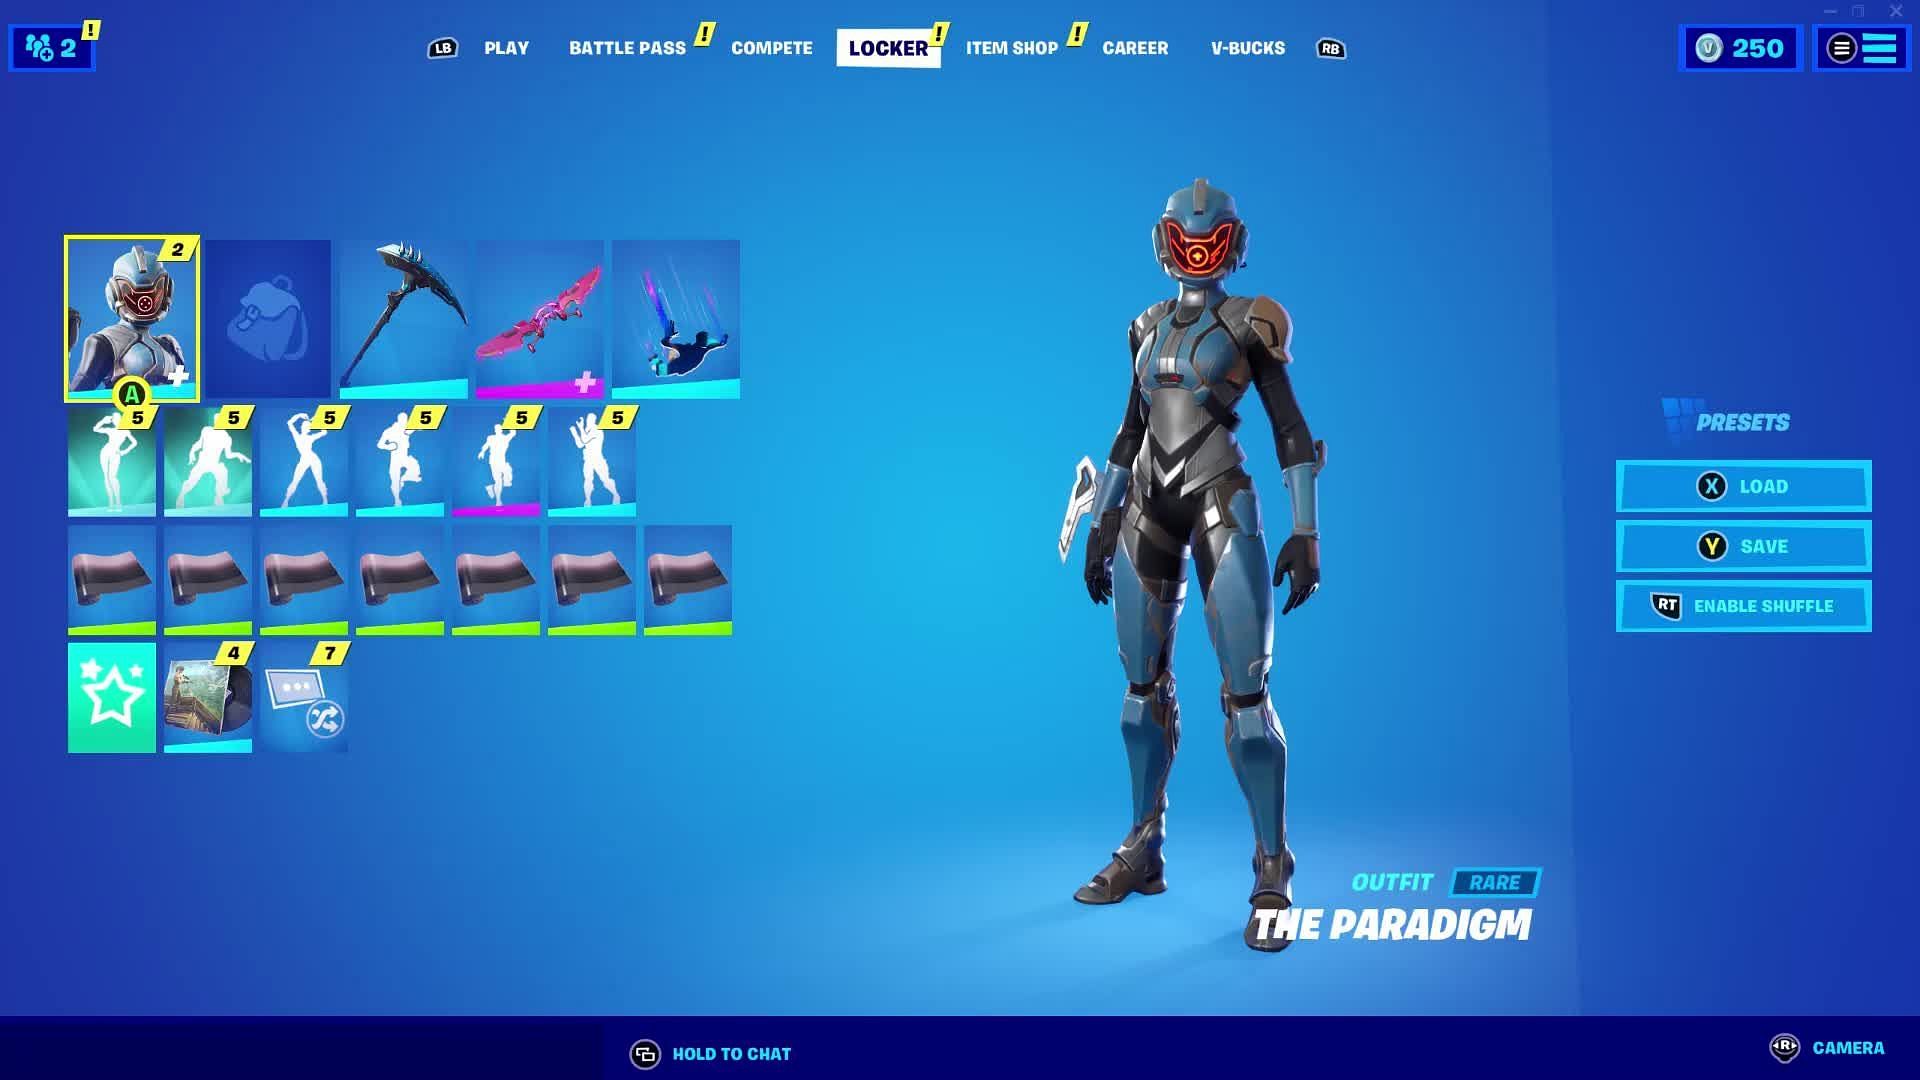 The Paradigm could be re-released as a Fortnite Chapter 3 Season 4 Battle Pass skin (Image via Epic Games)